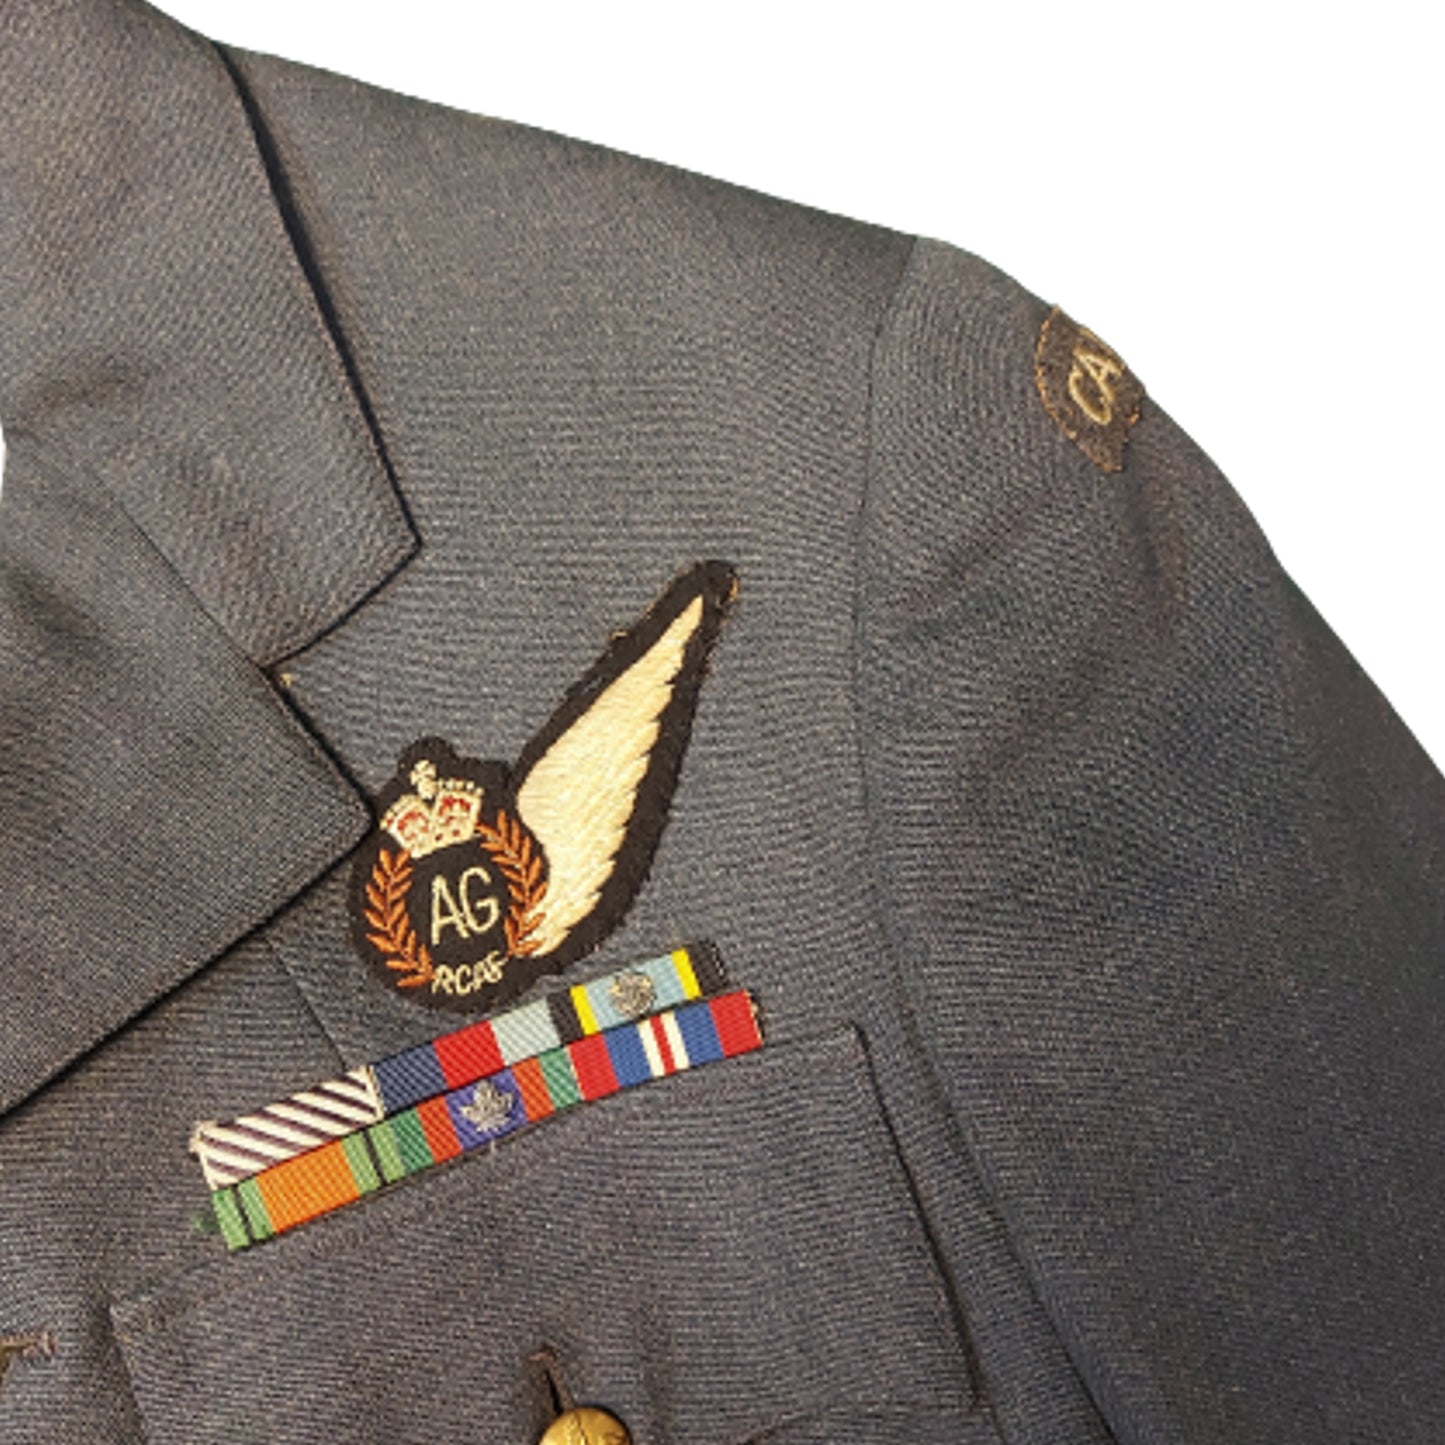 WW2 Canadian RCAF Air Gunner Service Dress Tunic -Air Crew Europe -DFC Recipient With Provenance